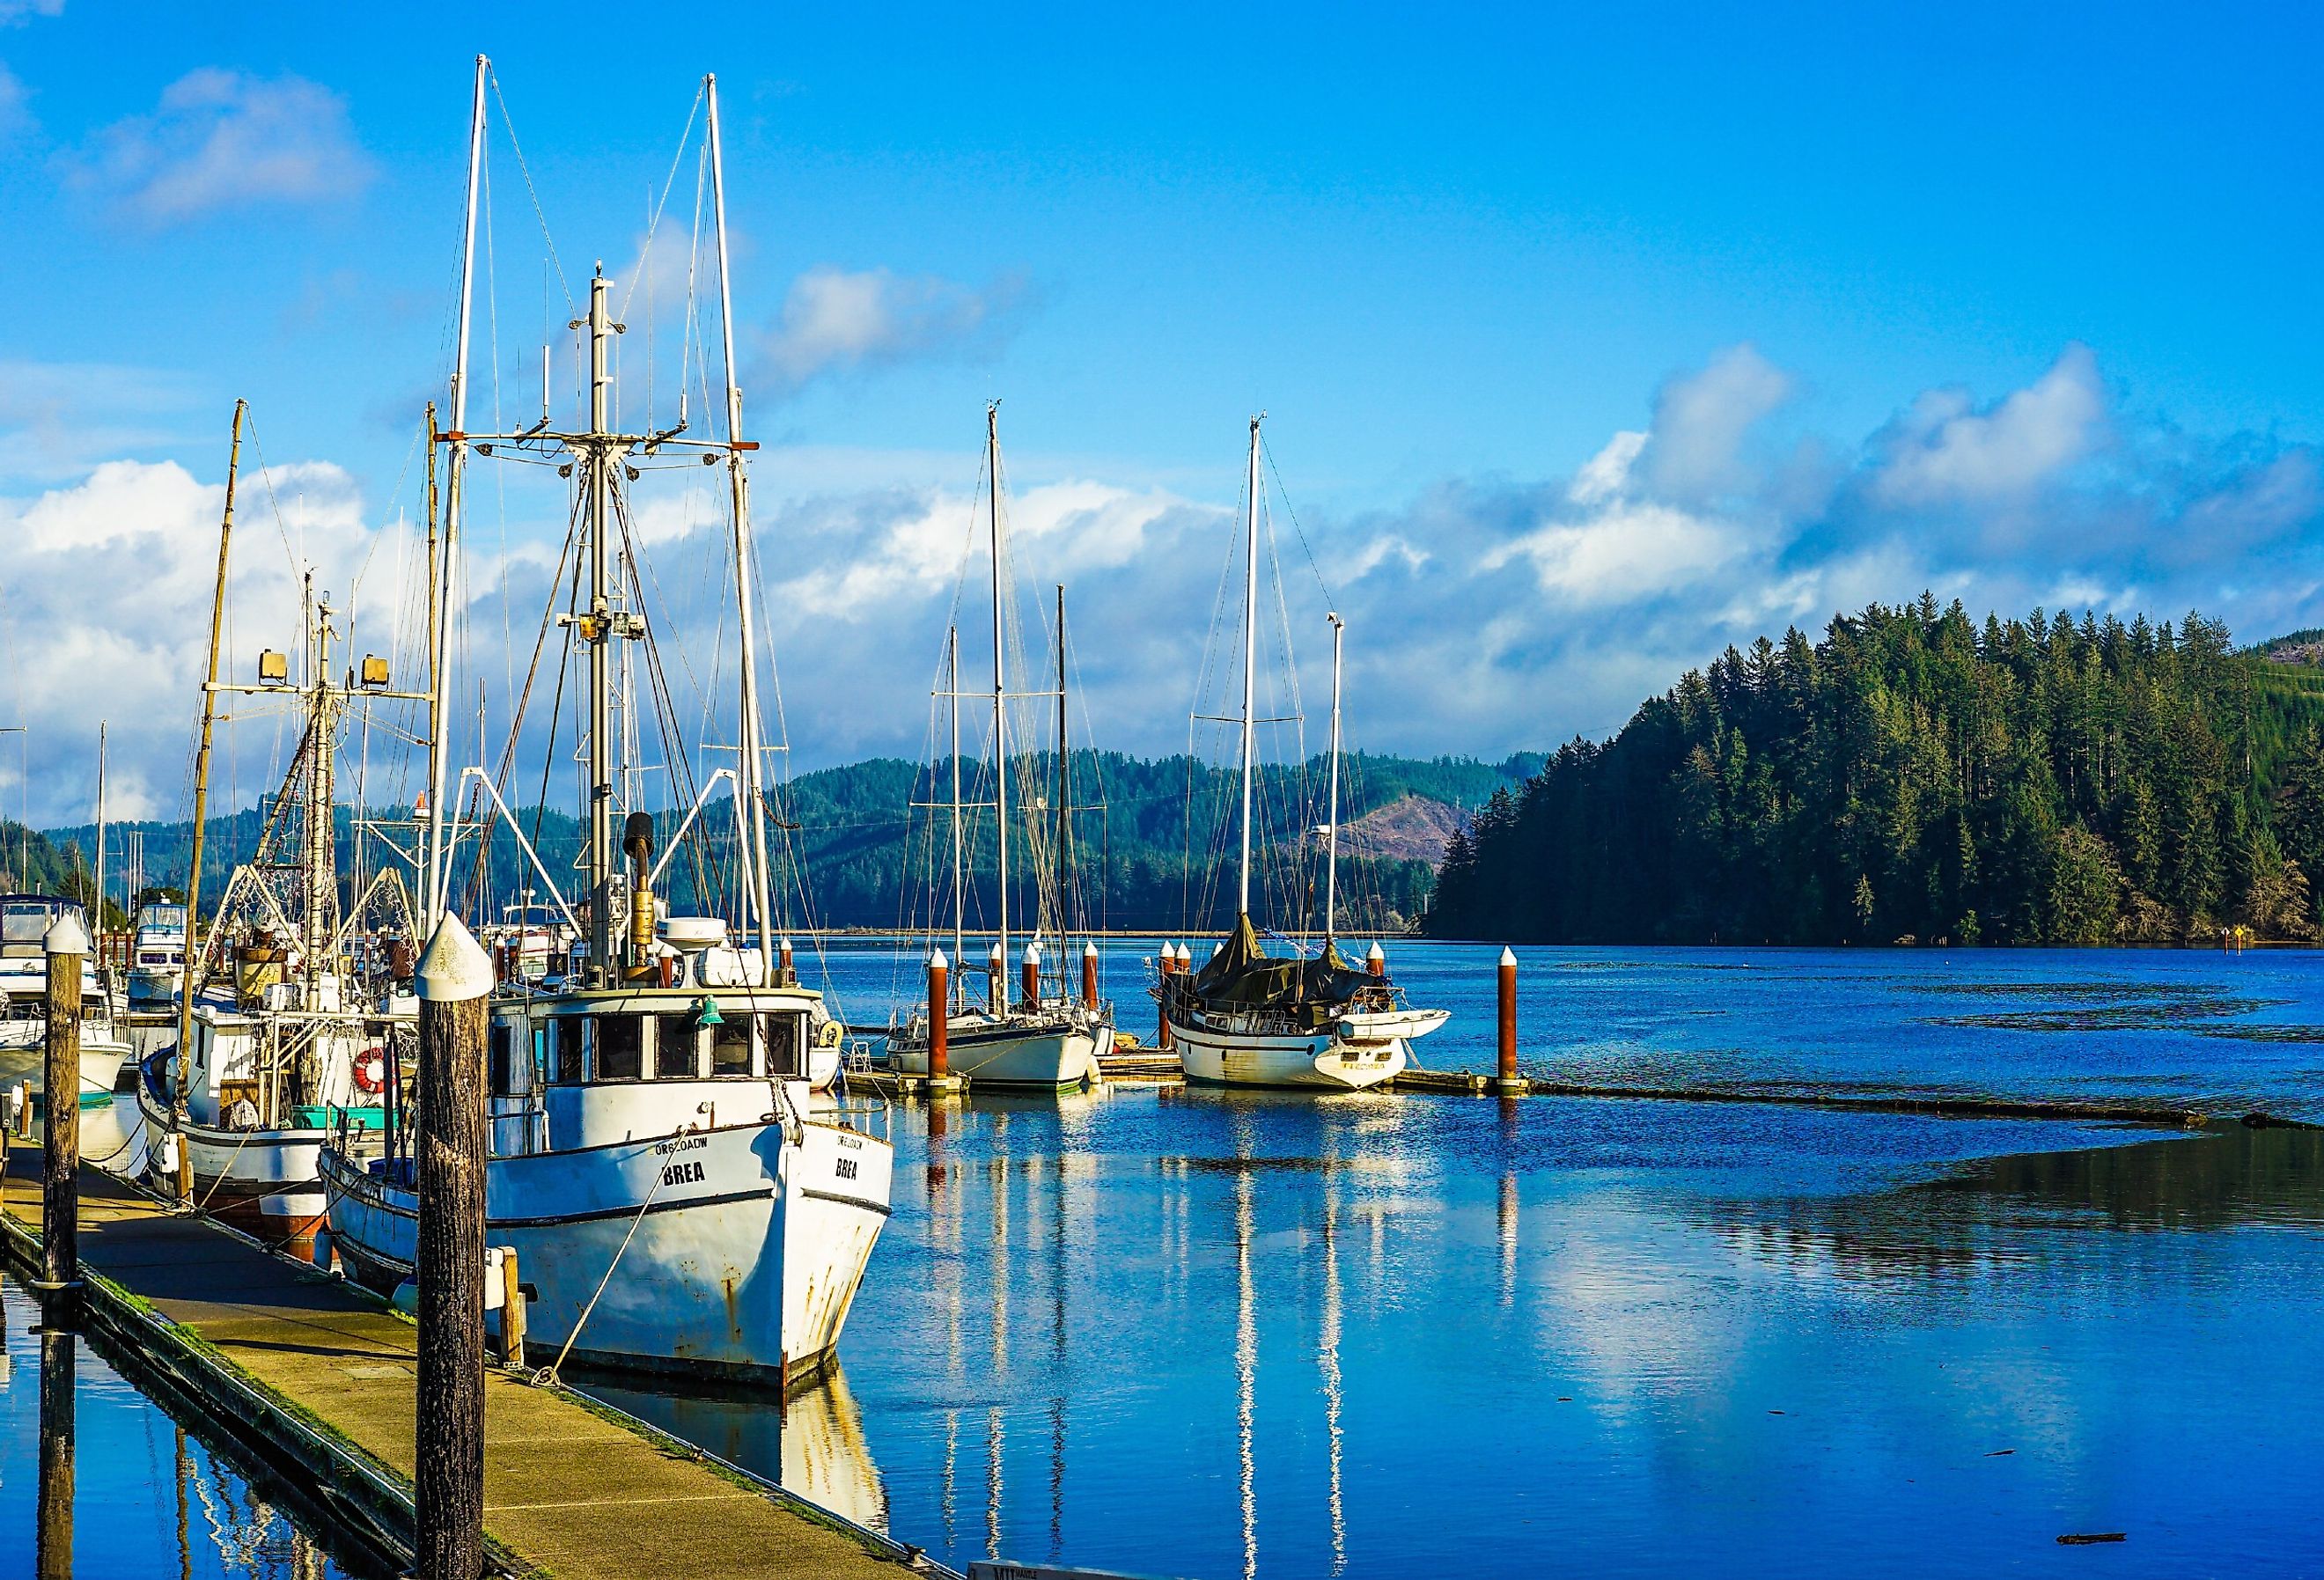 Old small fishing boat in harbor in Florence, Oregon. Image credit NeungPH via Shutterstock